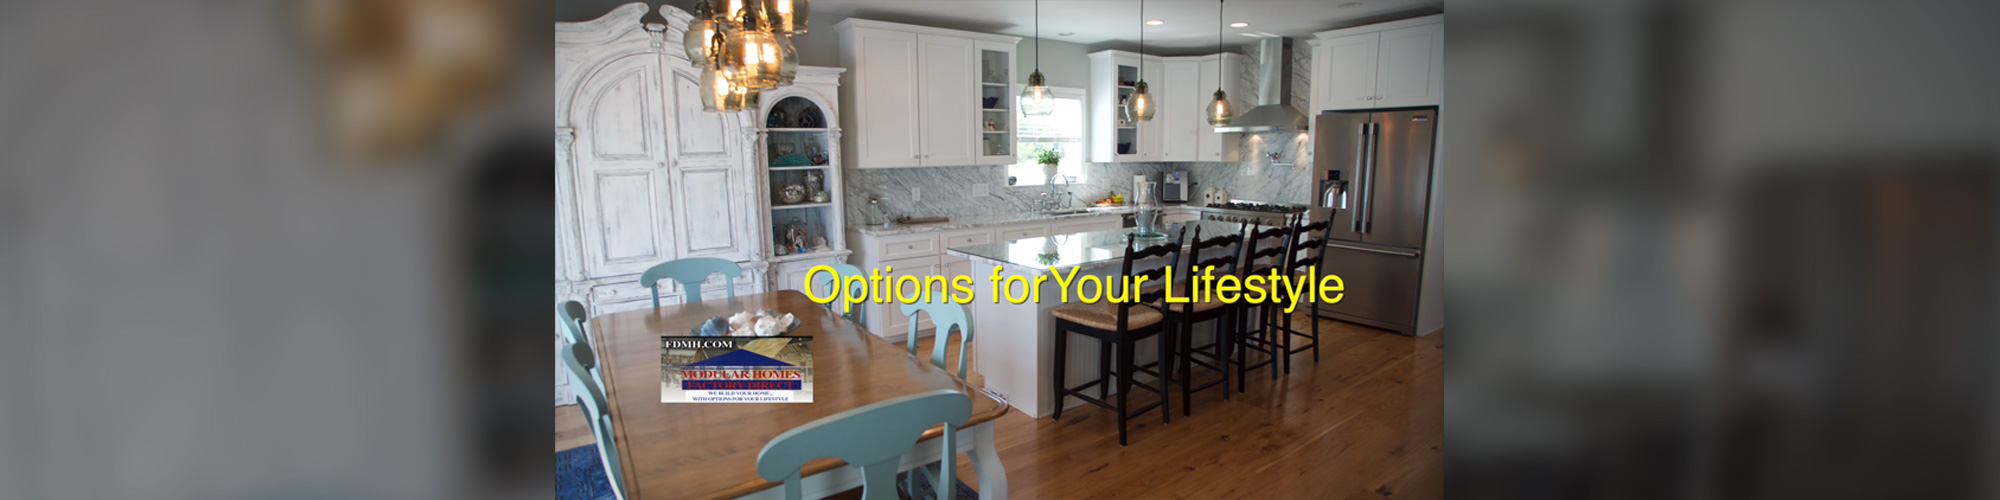 Options for Your Lifestyle